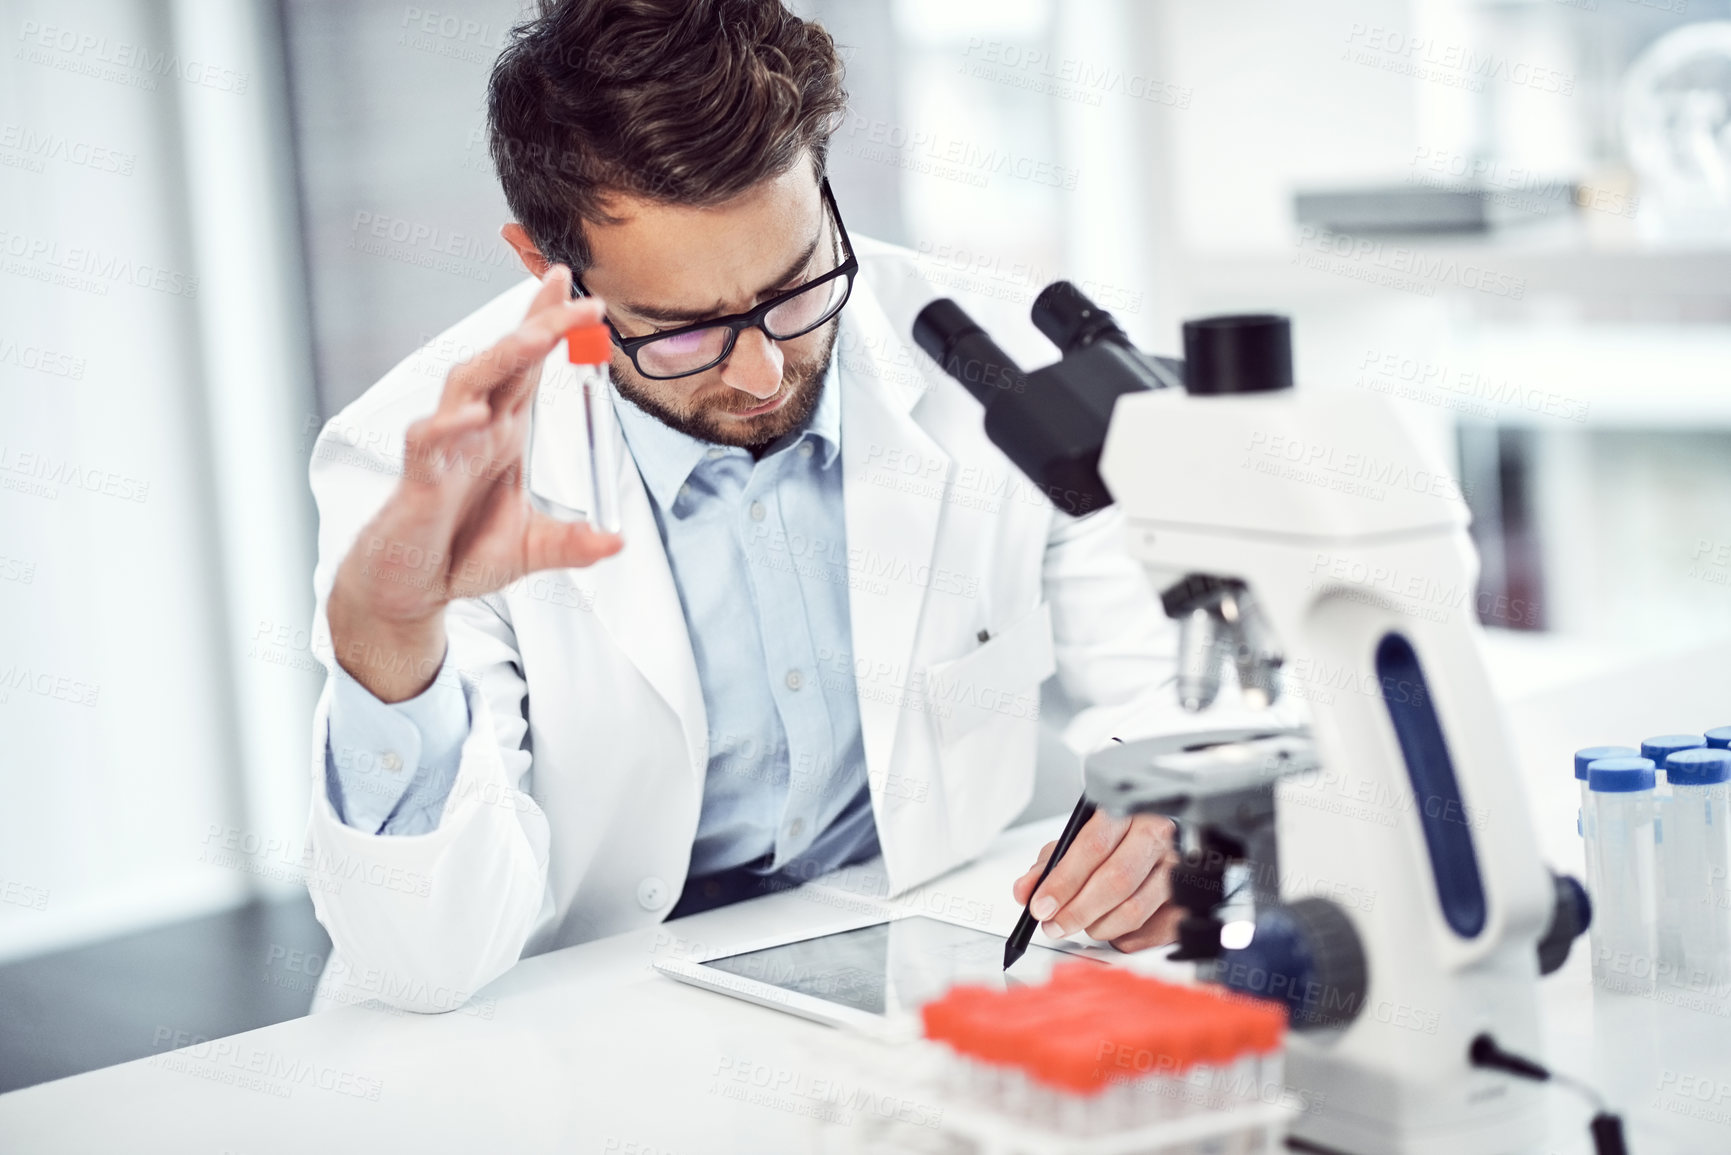 Buy stock photo Shot of a focused young male scientist making notes while holding up a test tube inside of a laboratory